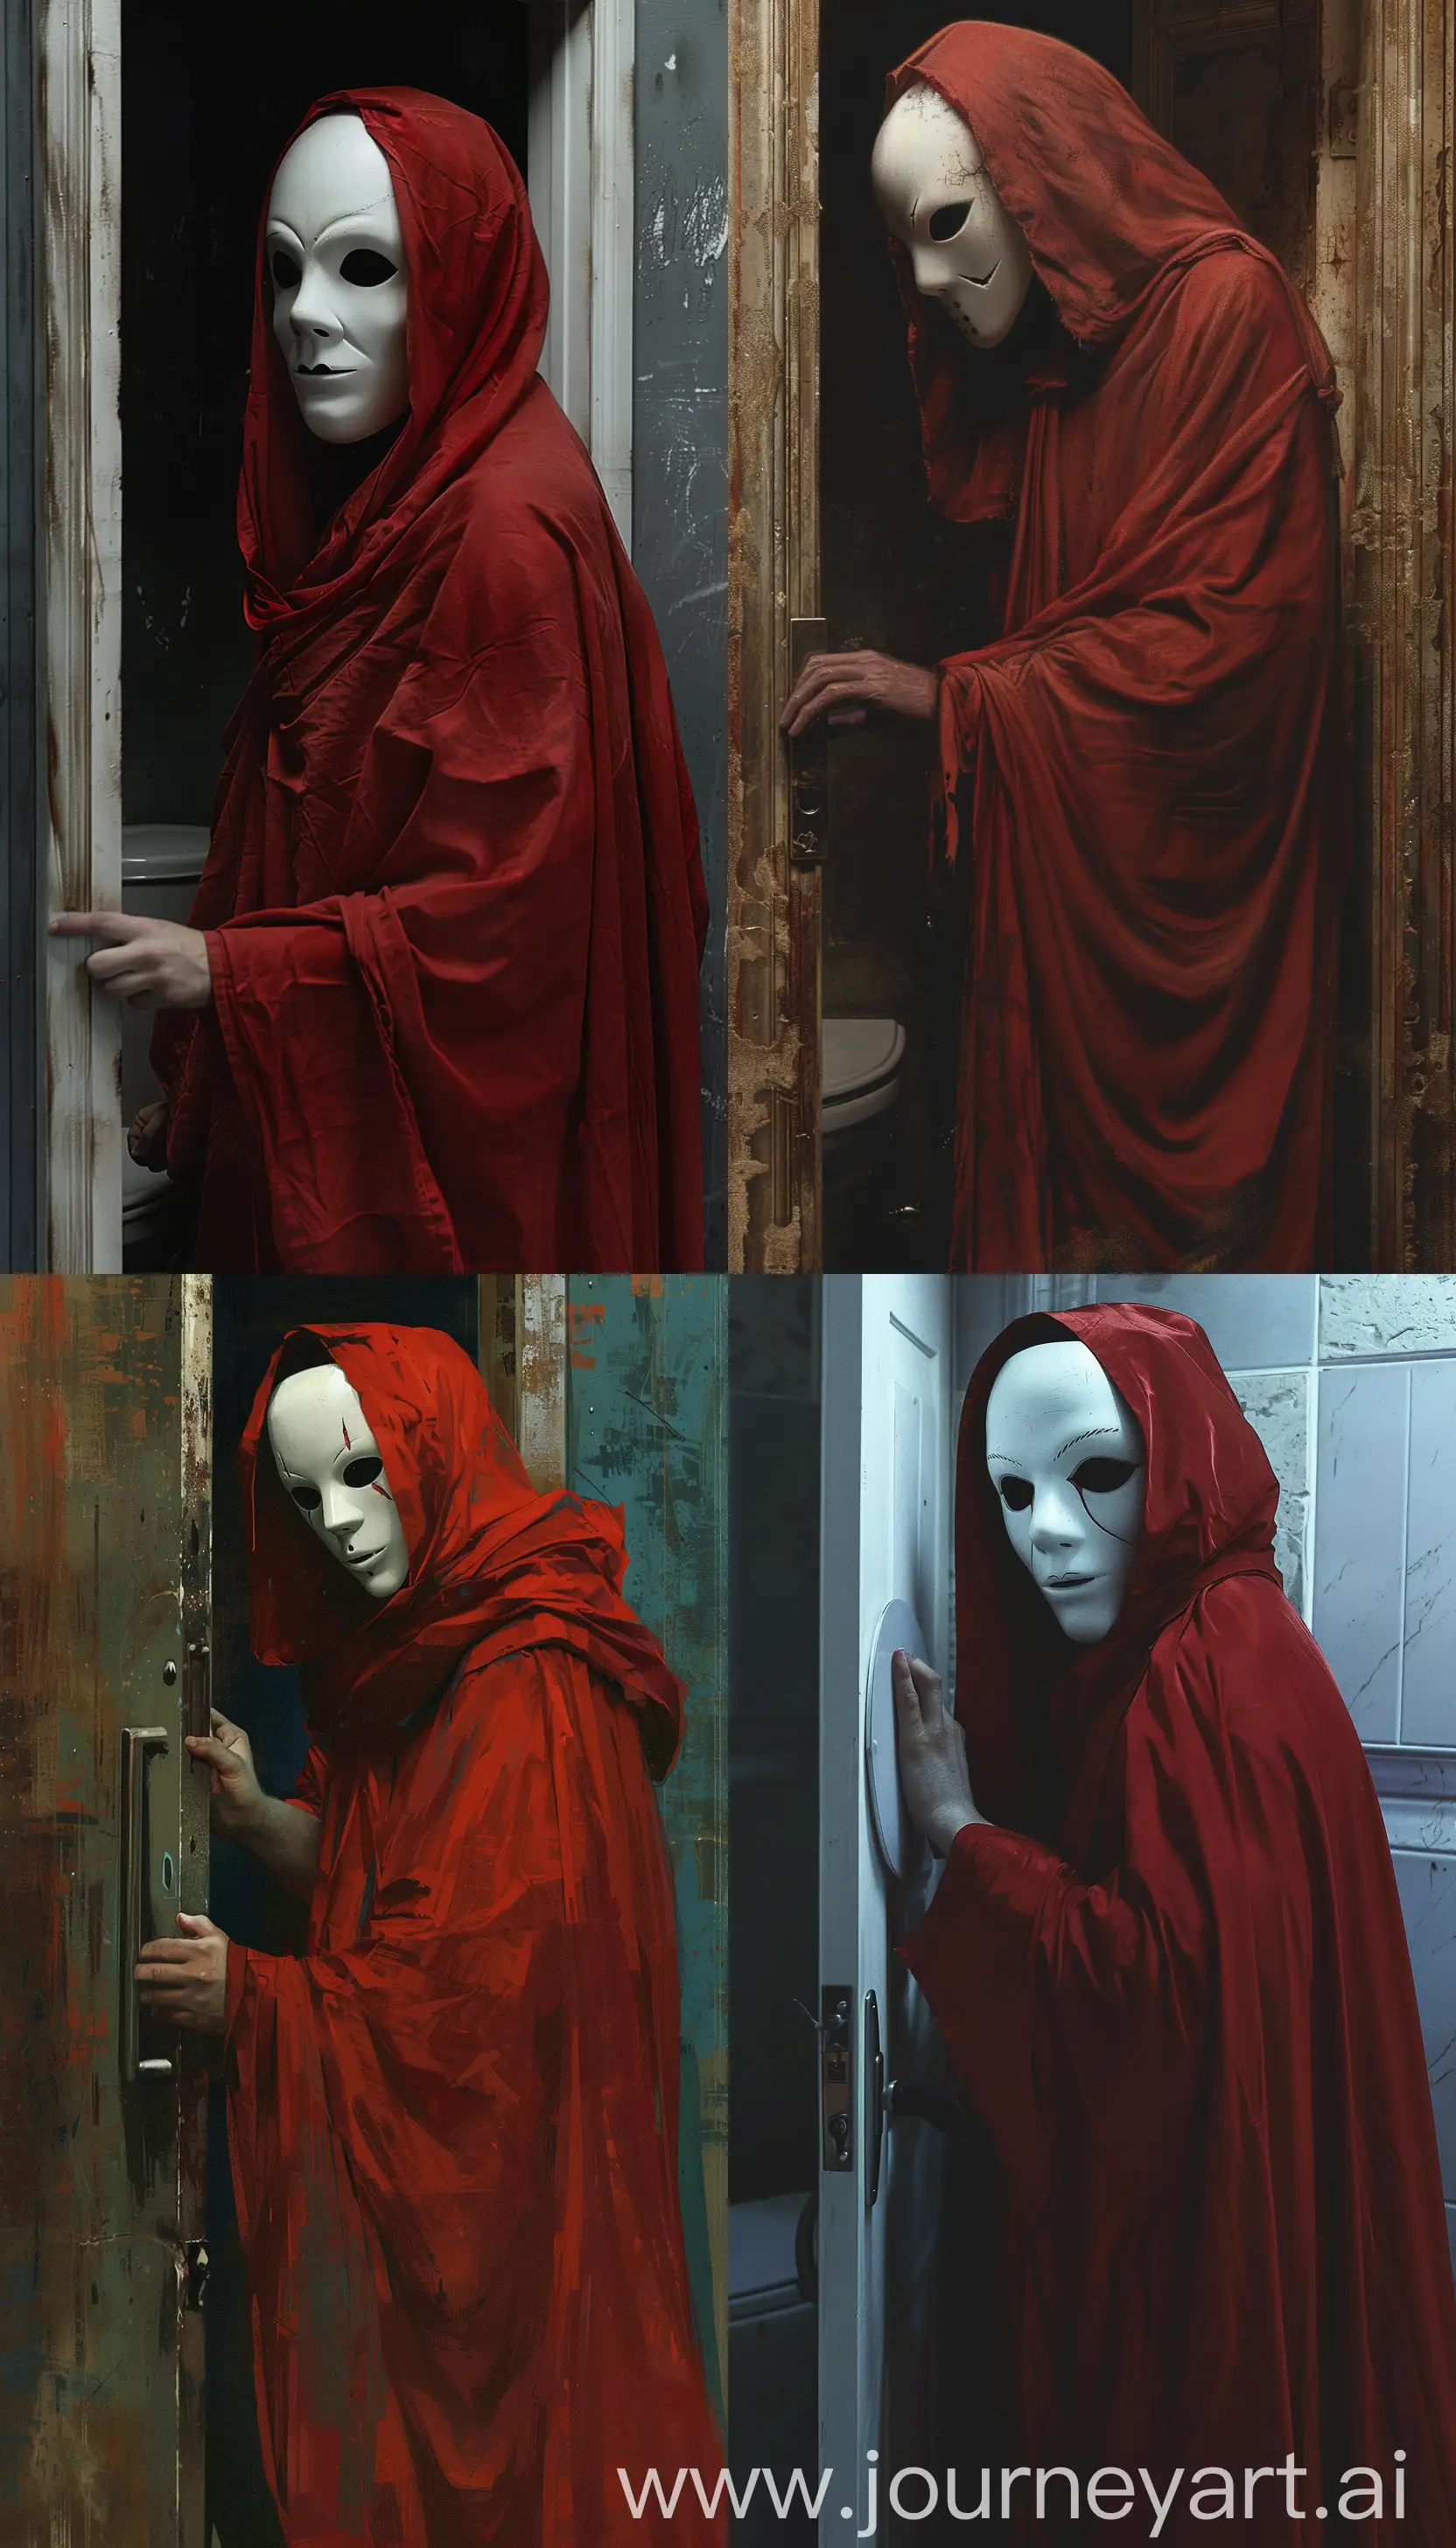 "Akamanto, an entity with a white mask devoid of eyes and nose, draped in a red cloak, knocking on the door of a restroom, eerie." --ar 4:7 --v 6 